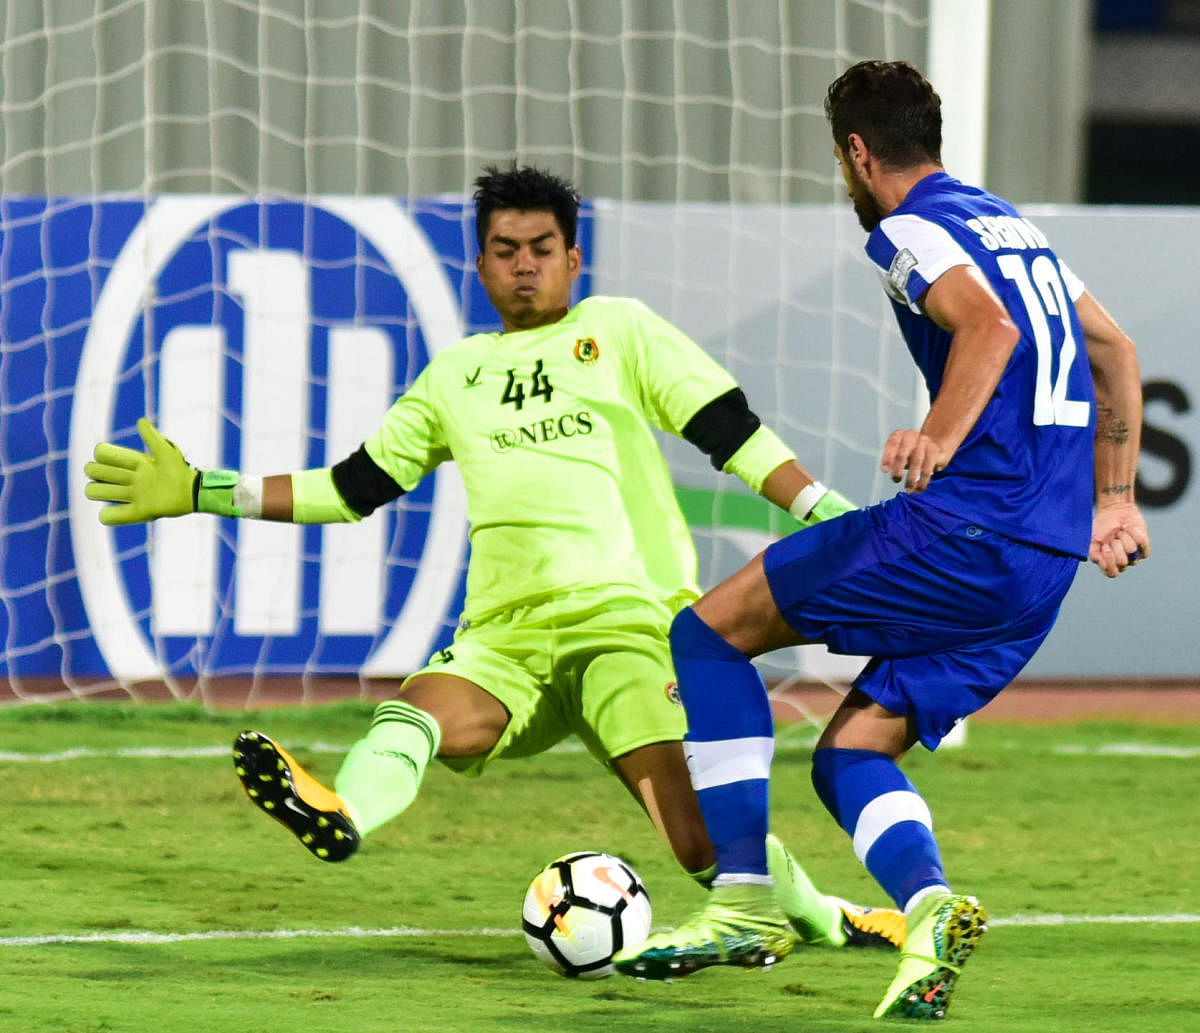 BFC's Daniel Segovia (right) tries to score past Aizawl FC goalkeeper Lalawmpuia during their clash in the AFC Cup football tournament at the Sree Kanteerava Stadium in Bengaluru on Wednesday. (DH Photo/B H Shivakumar)